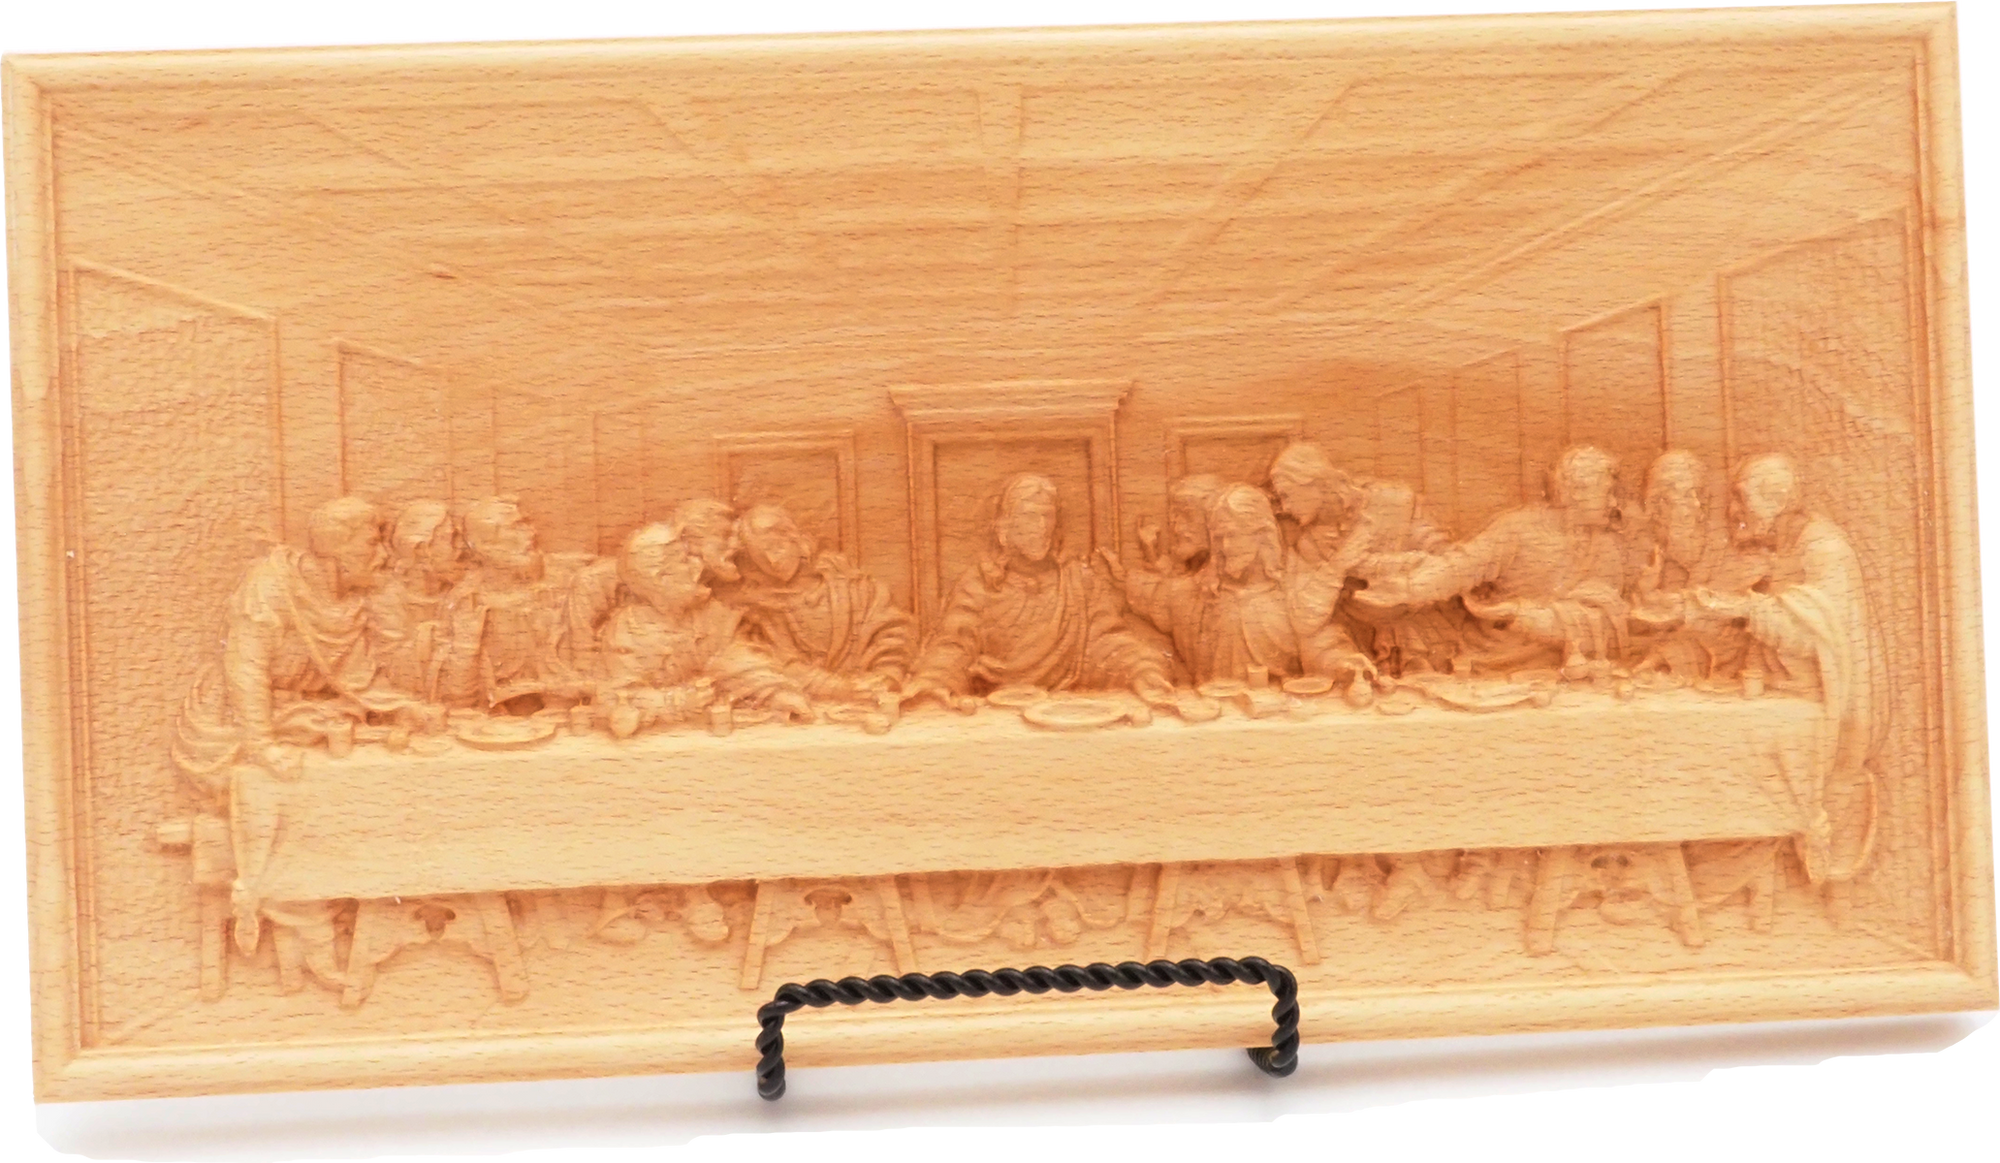 Ad Crucem 3D Carving - The Last Supper